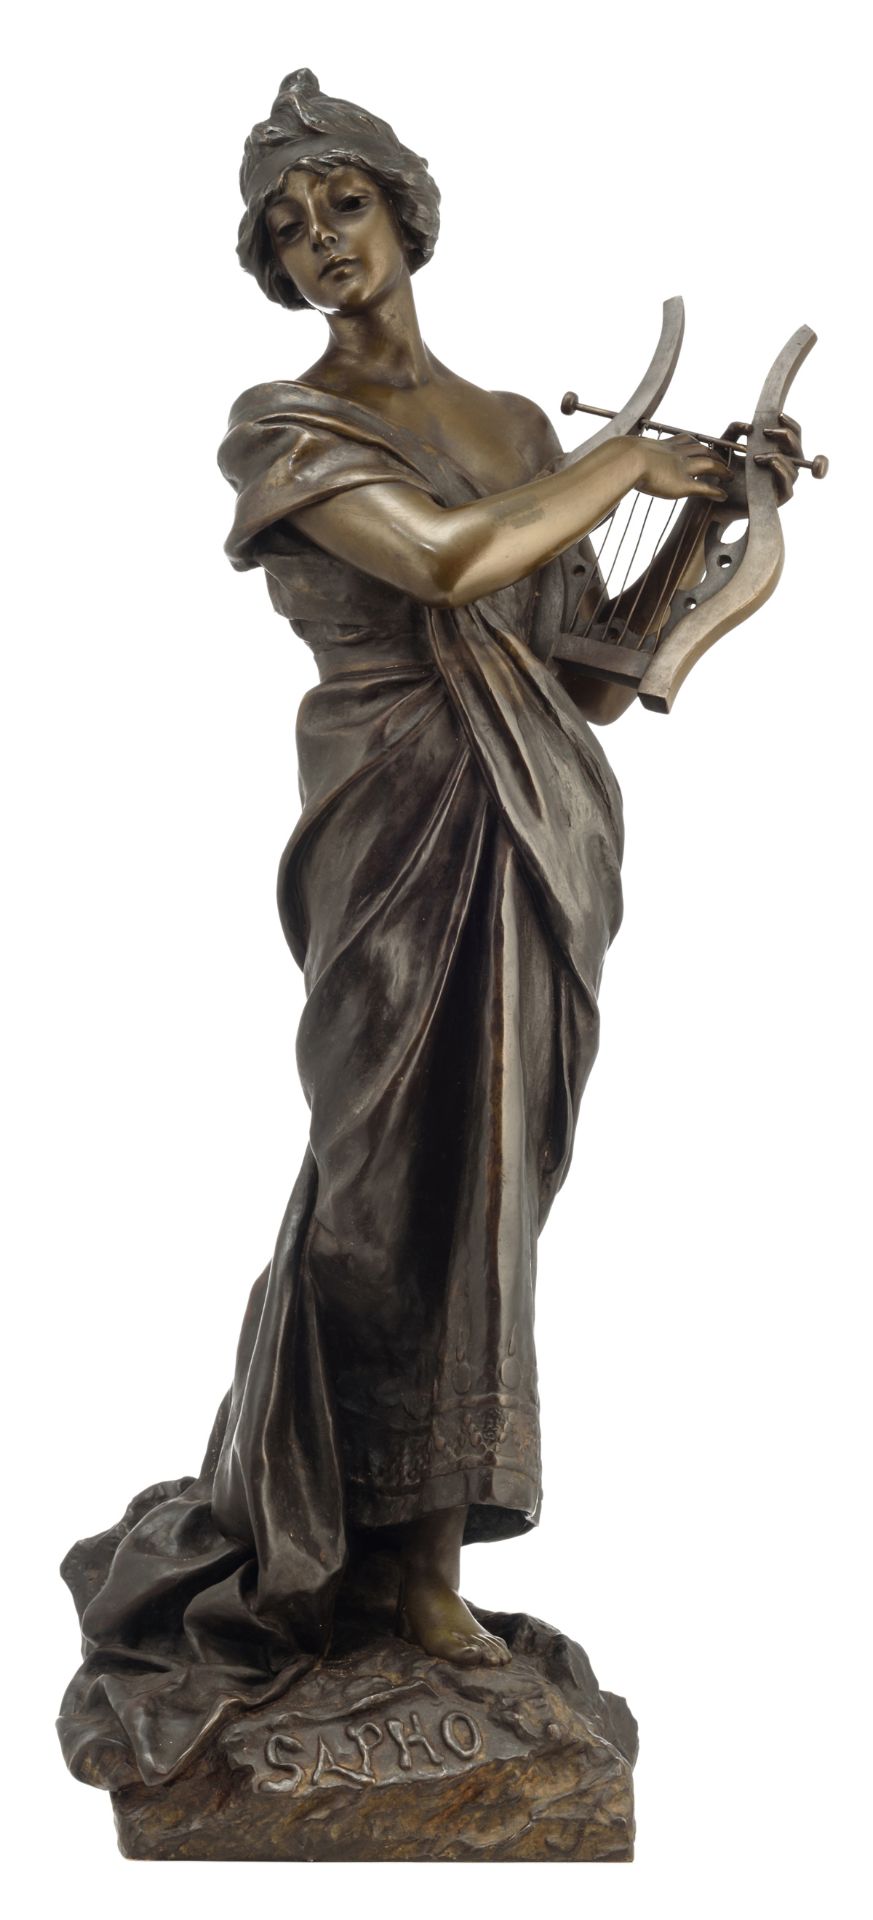 Villanis E., 'Sapho', green and brown patinated bronze, with a casting mark by 'Société des bronzes